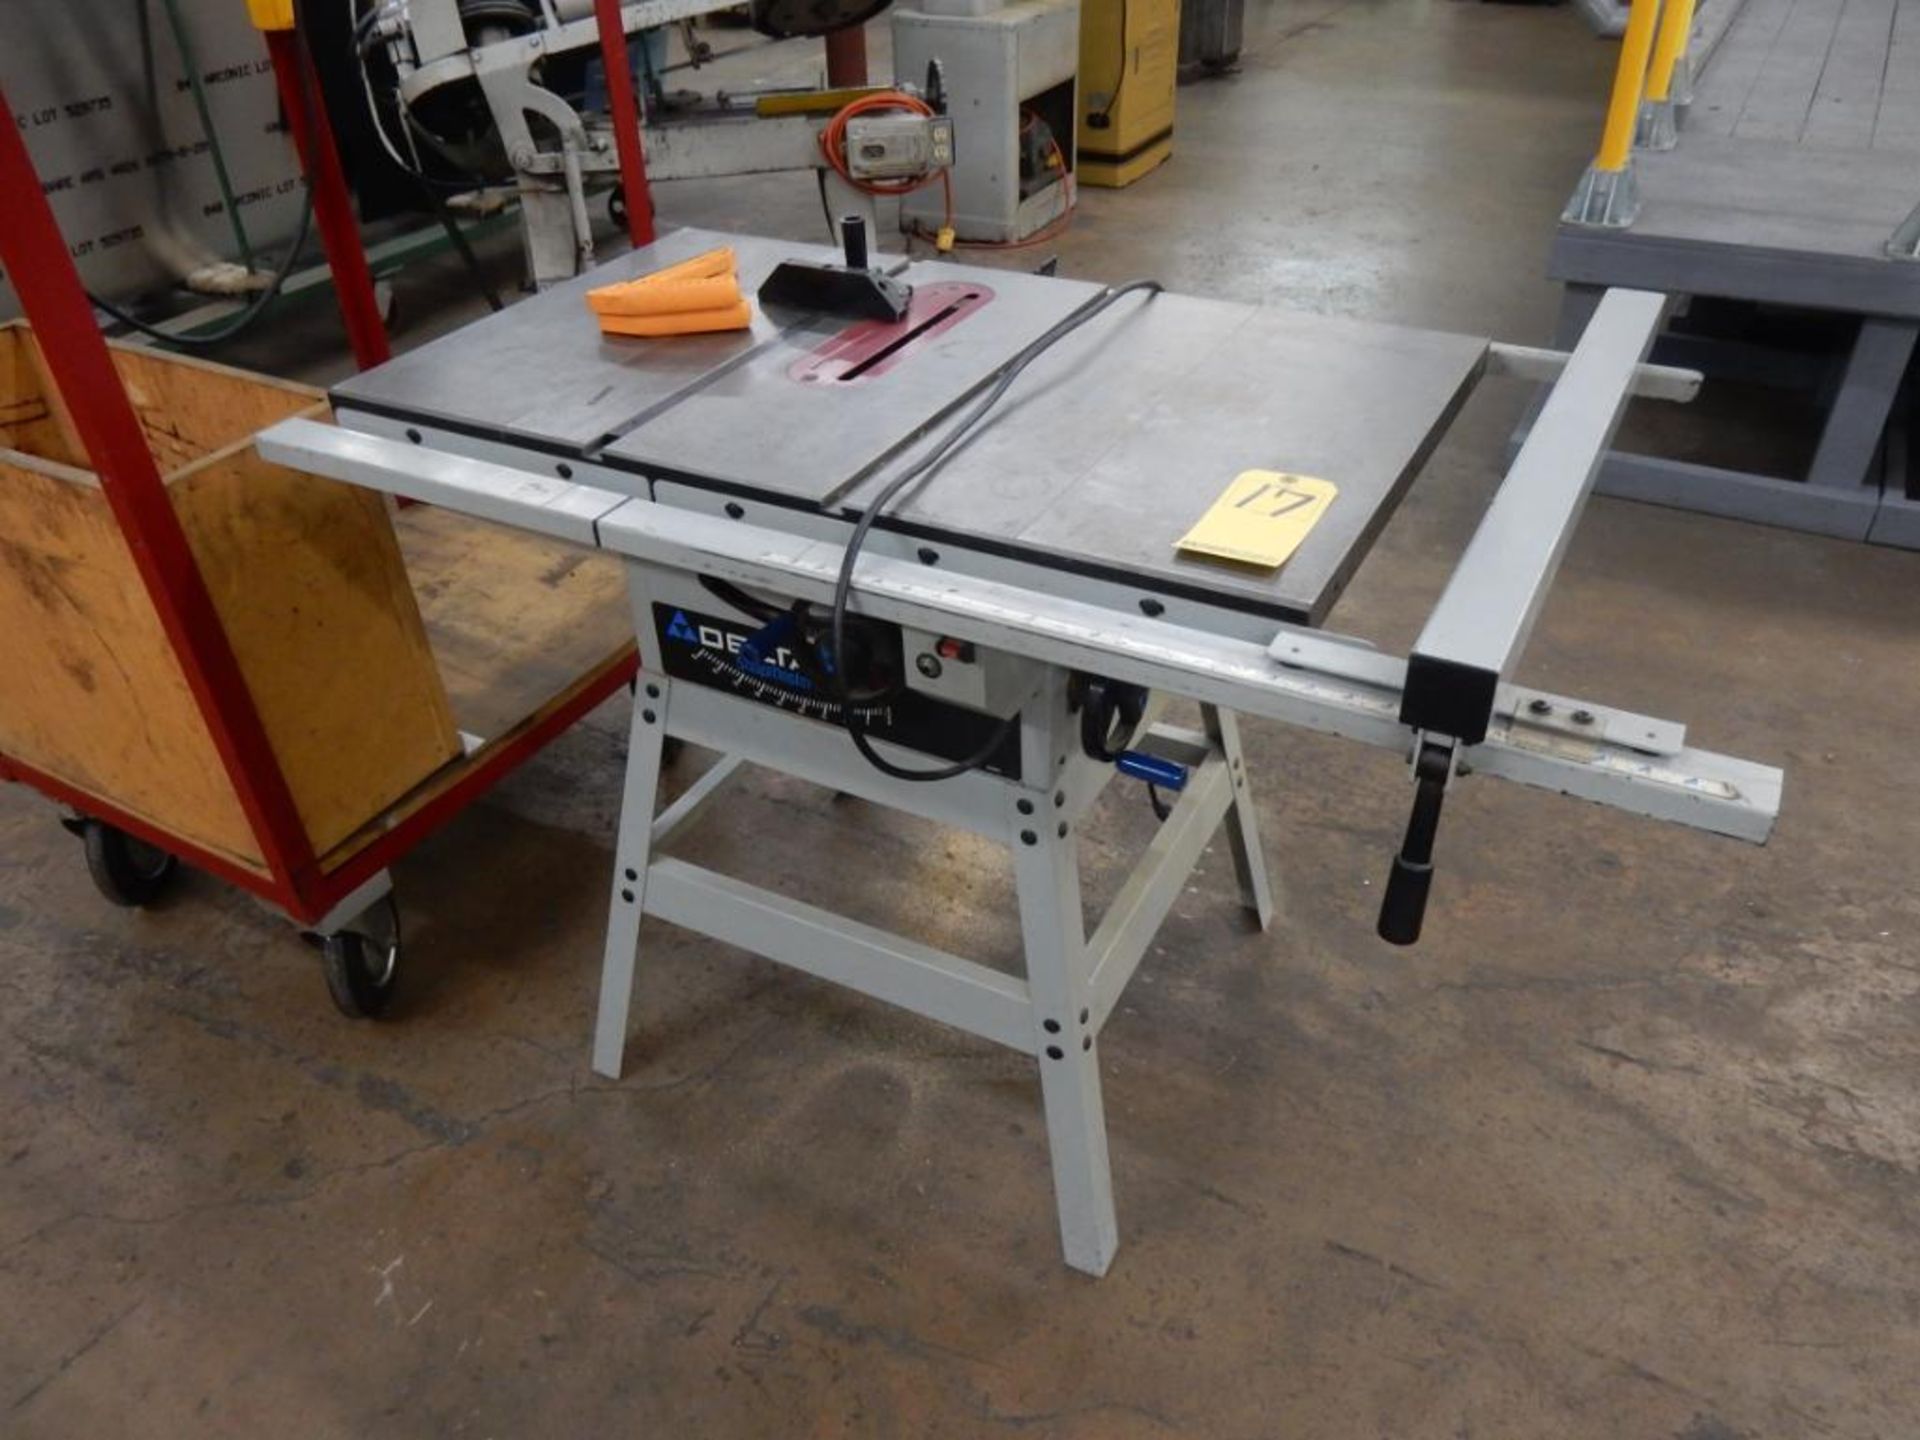 DELTA M# TS350 SHOPMASTER 10" TABLE SAW, S/N 013030